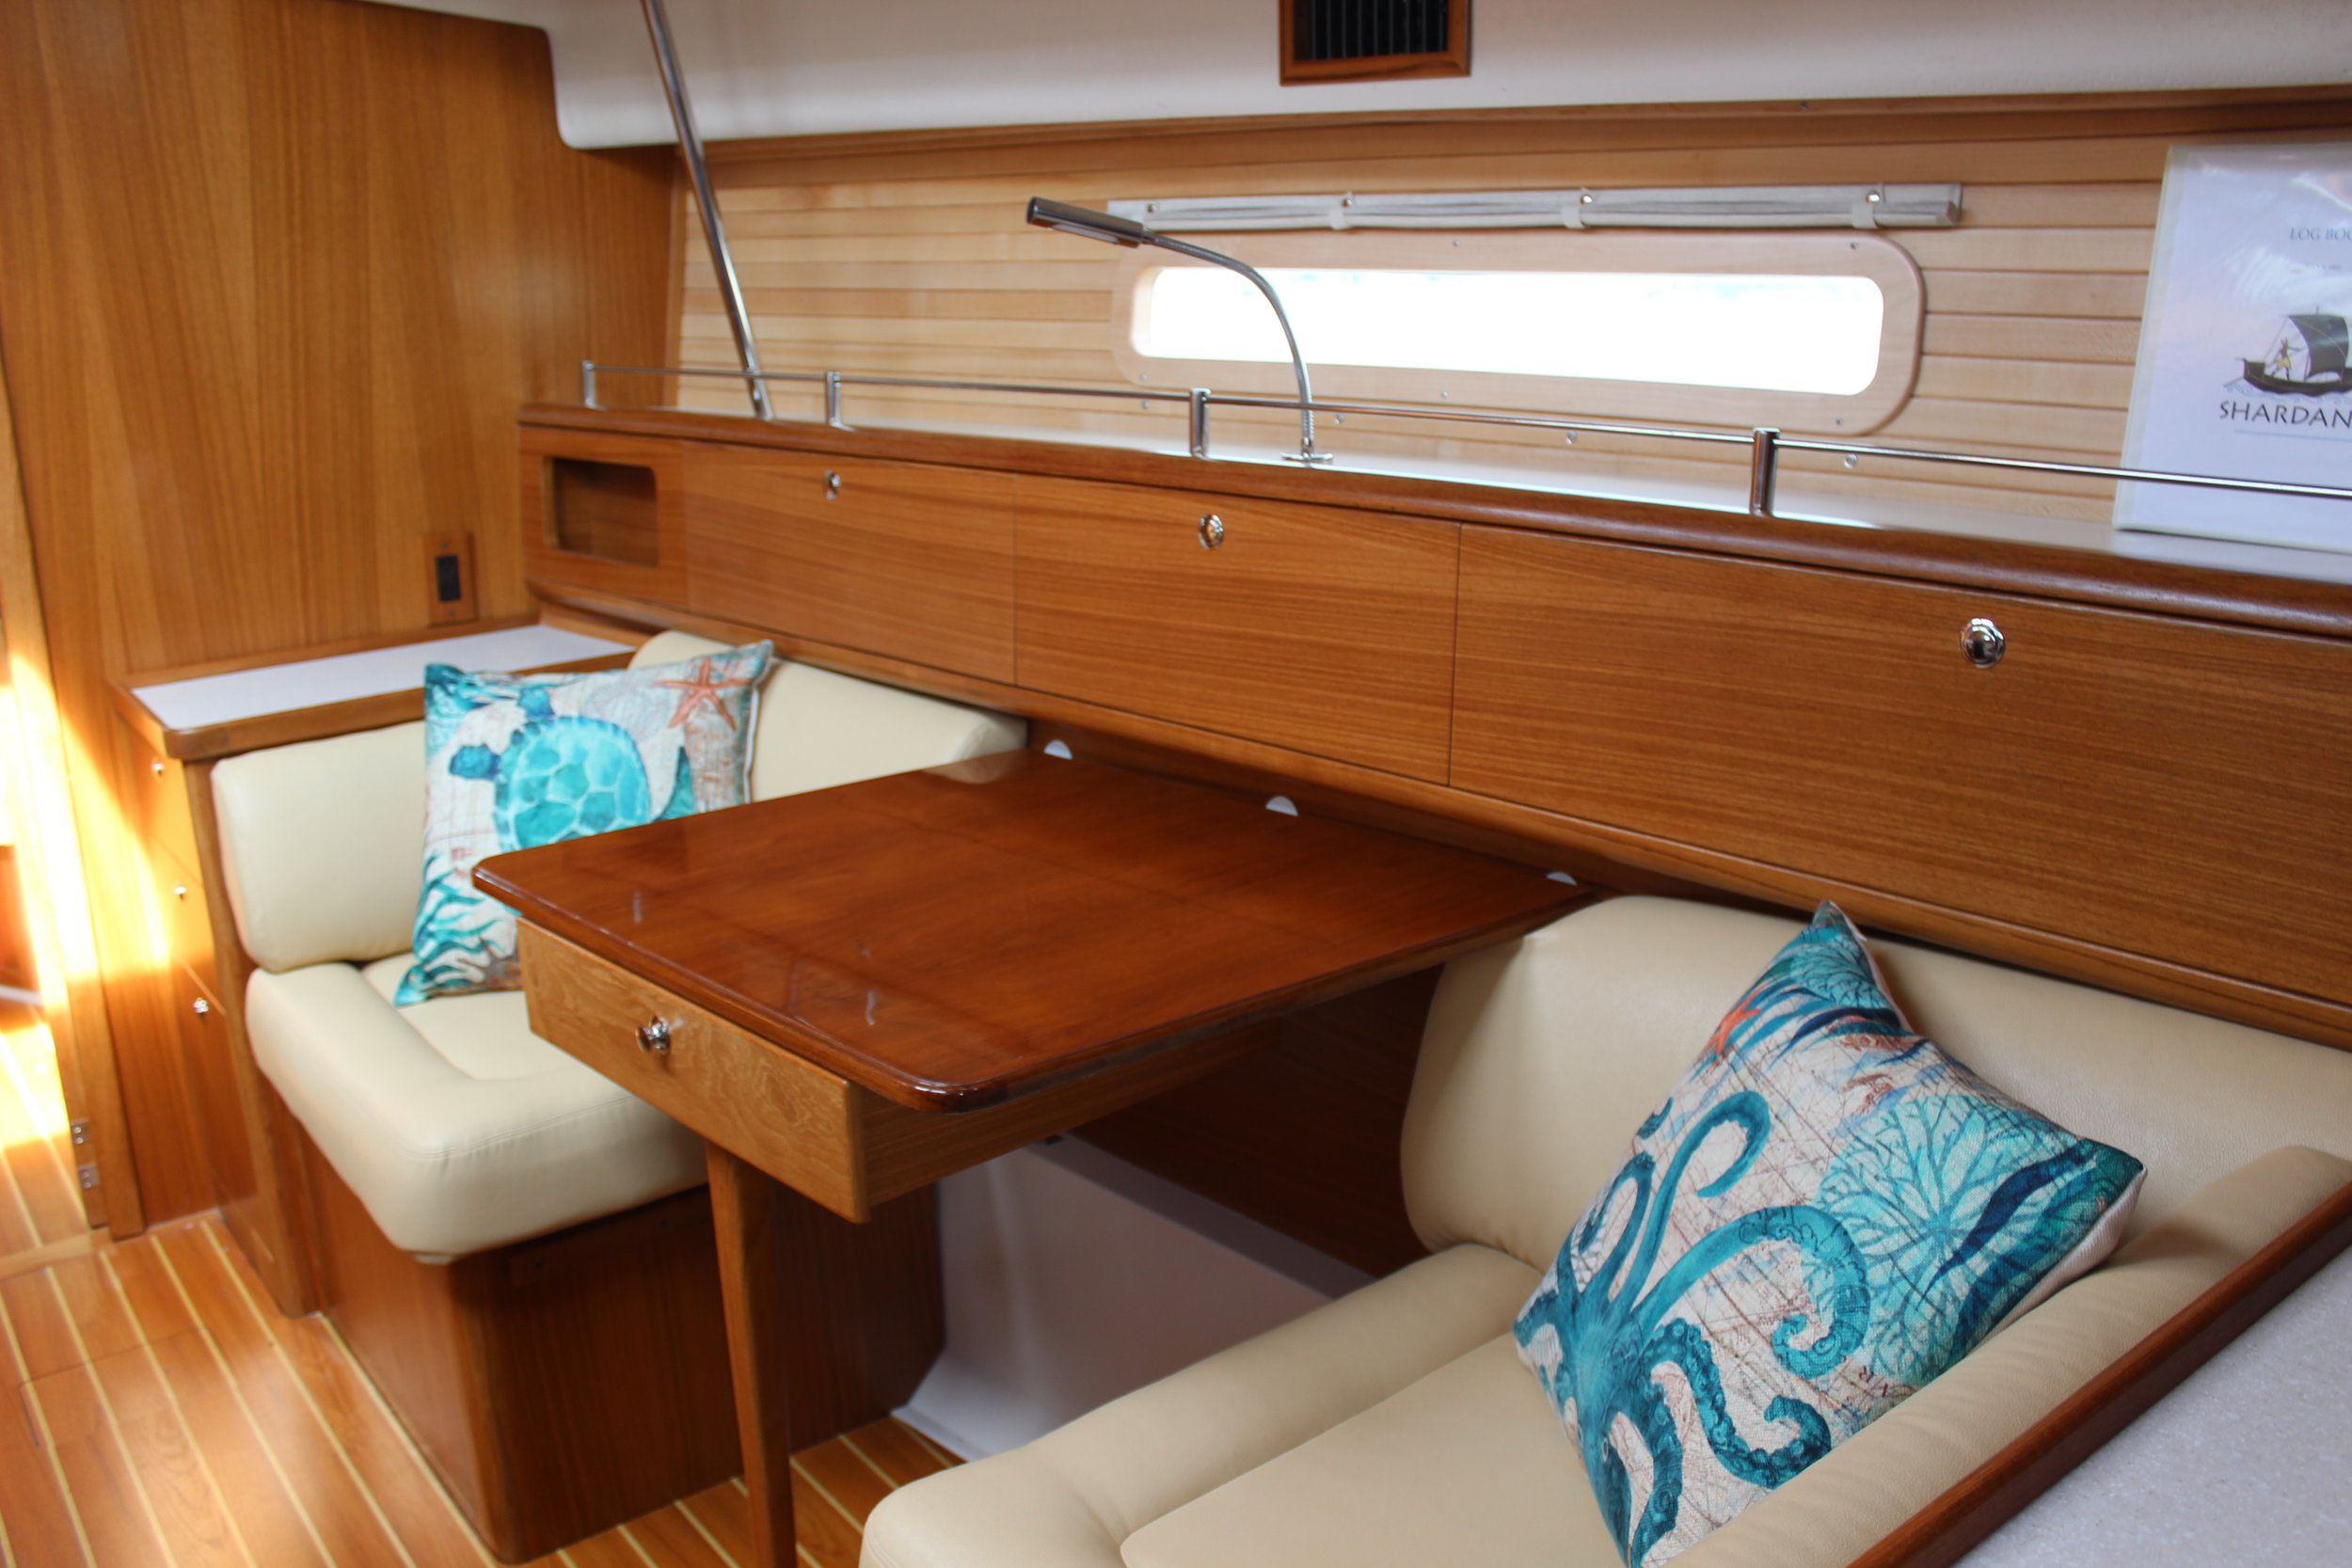 Shardana Cocktail Table Converts to a Berth